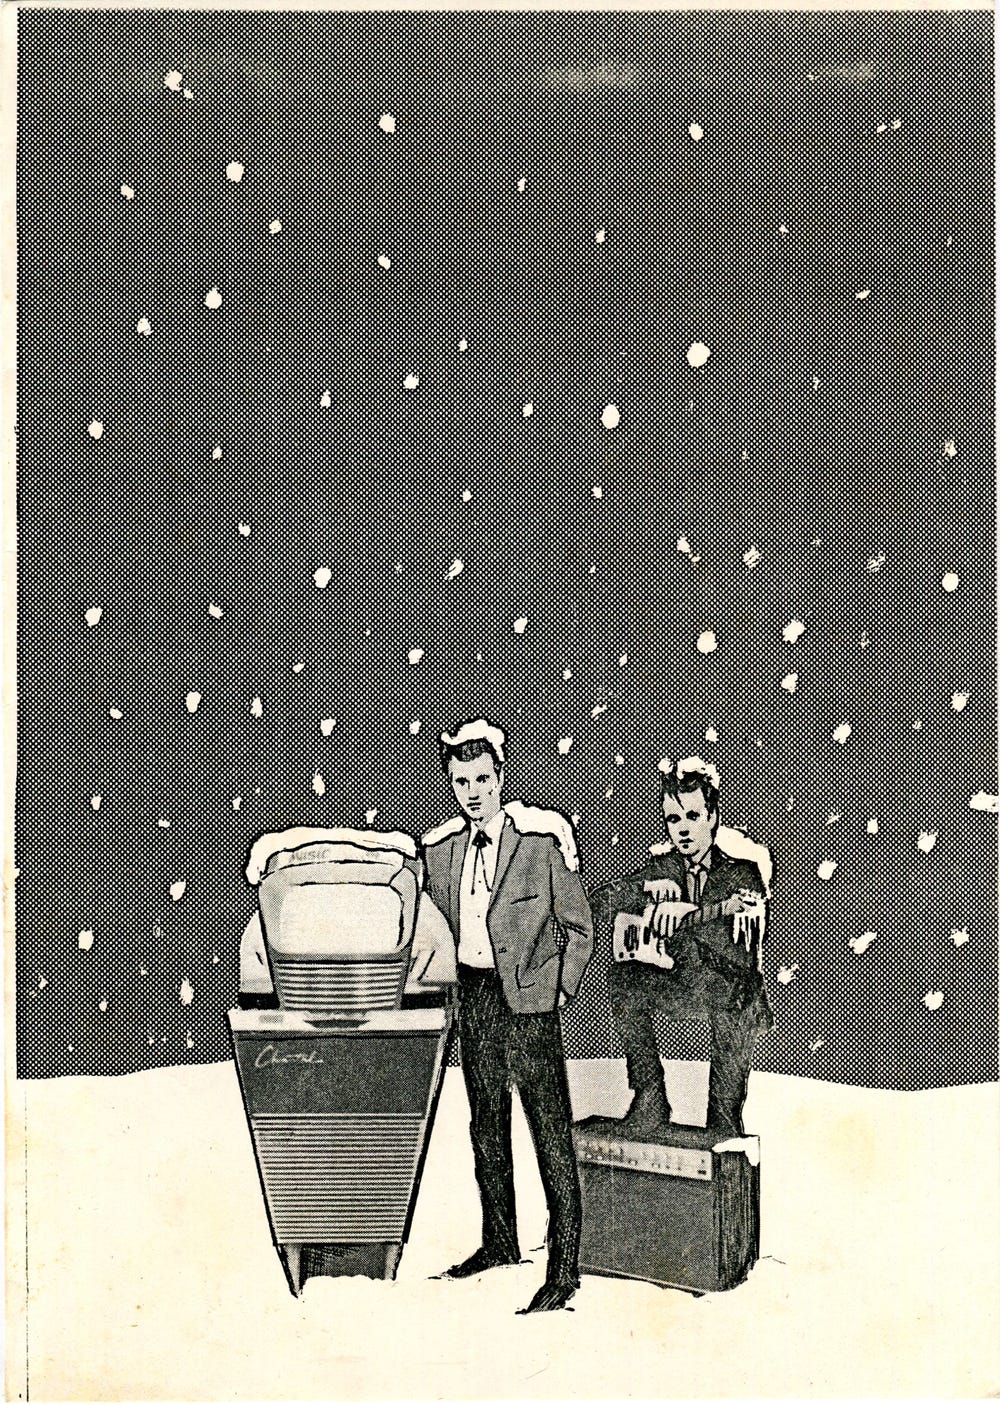 Drawing of two retro-looking musicians in the snow. One is standing next to a jukebox and one is holding a guitar and sitting on an amp.